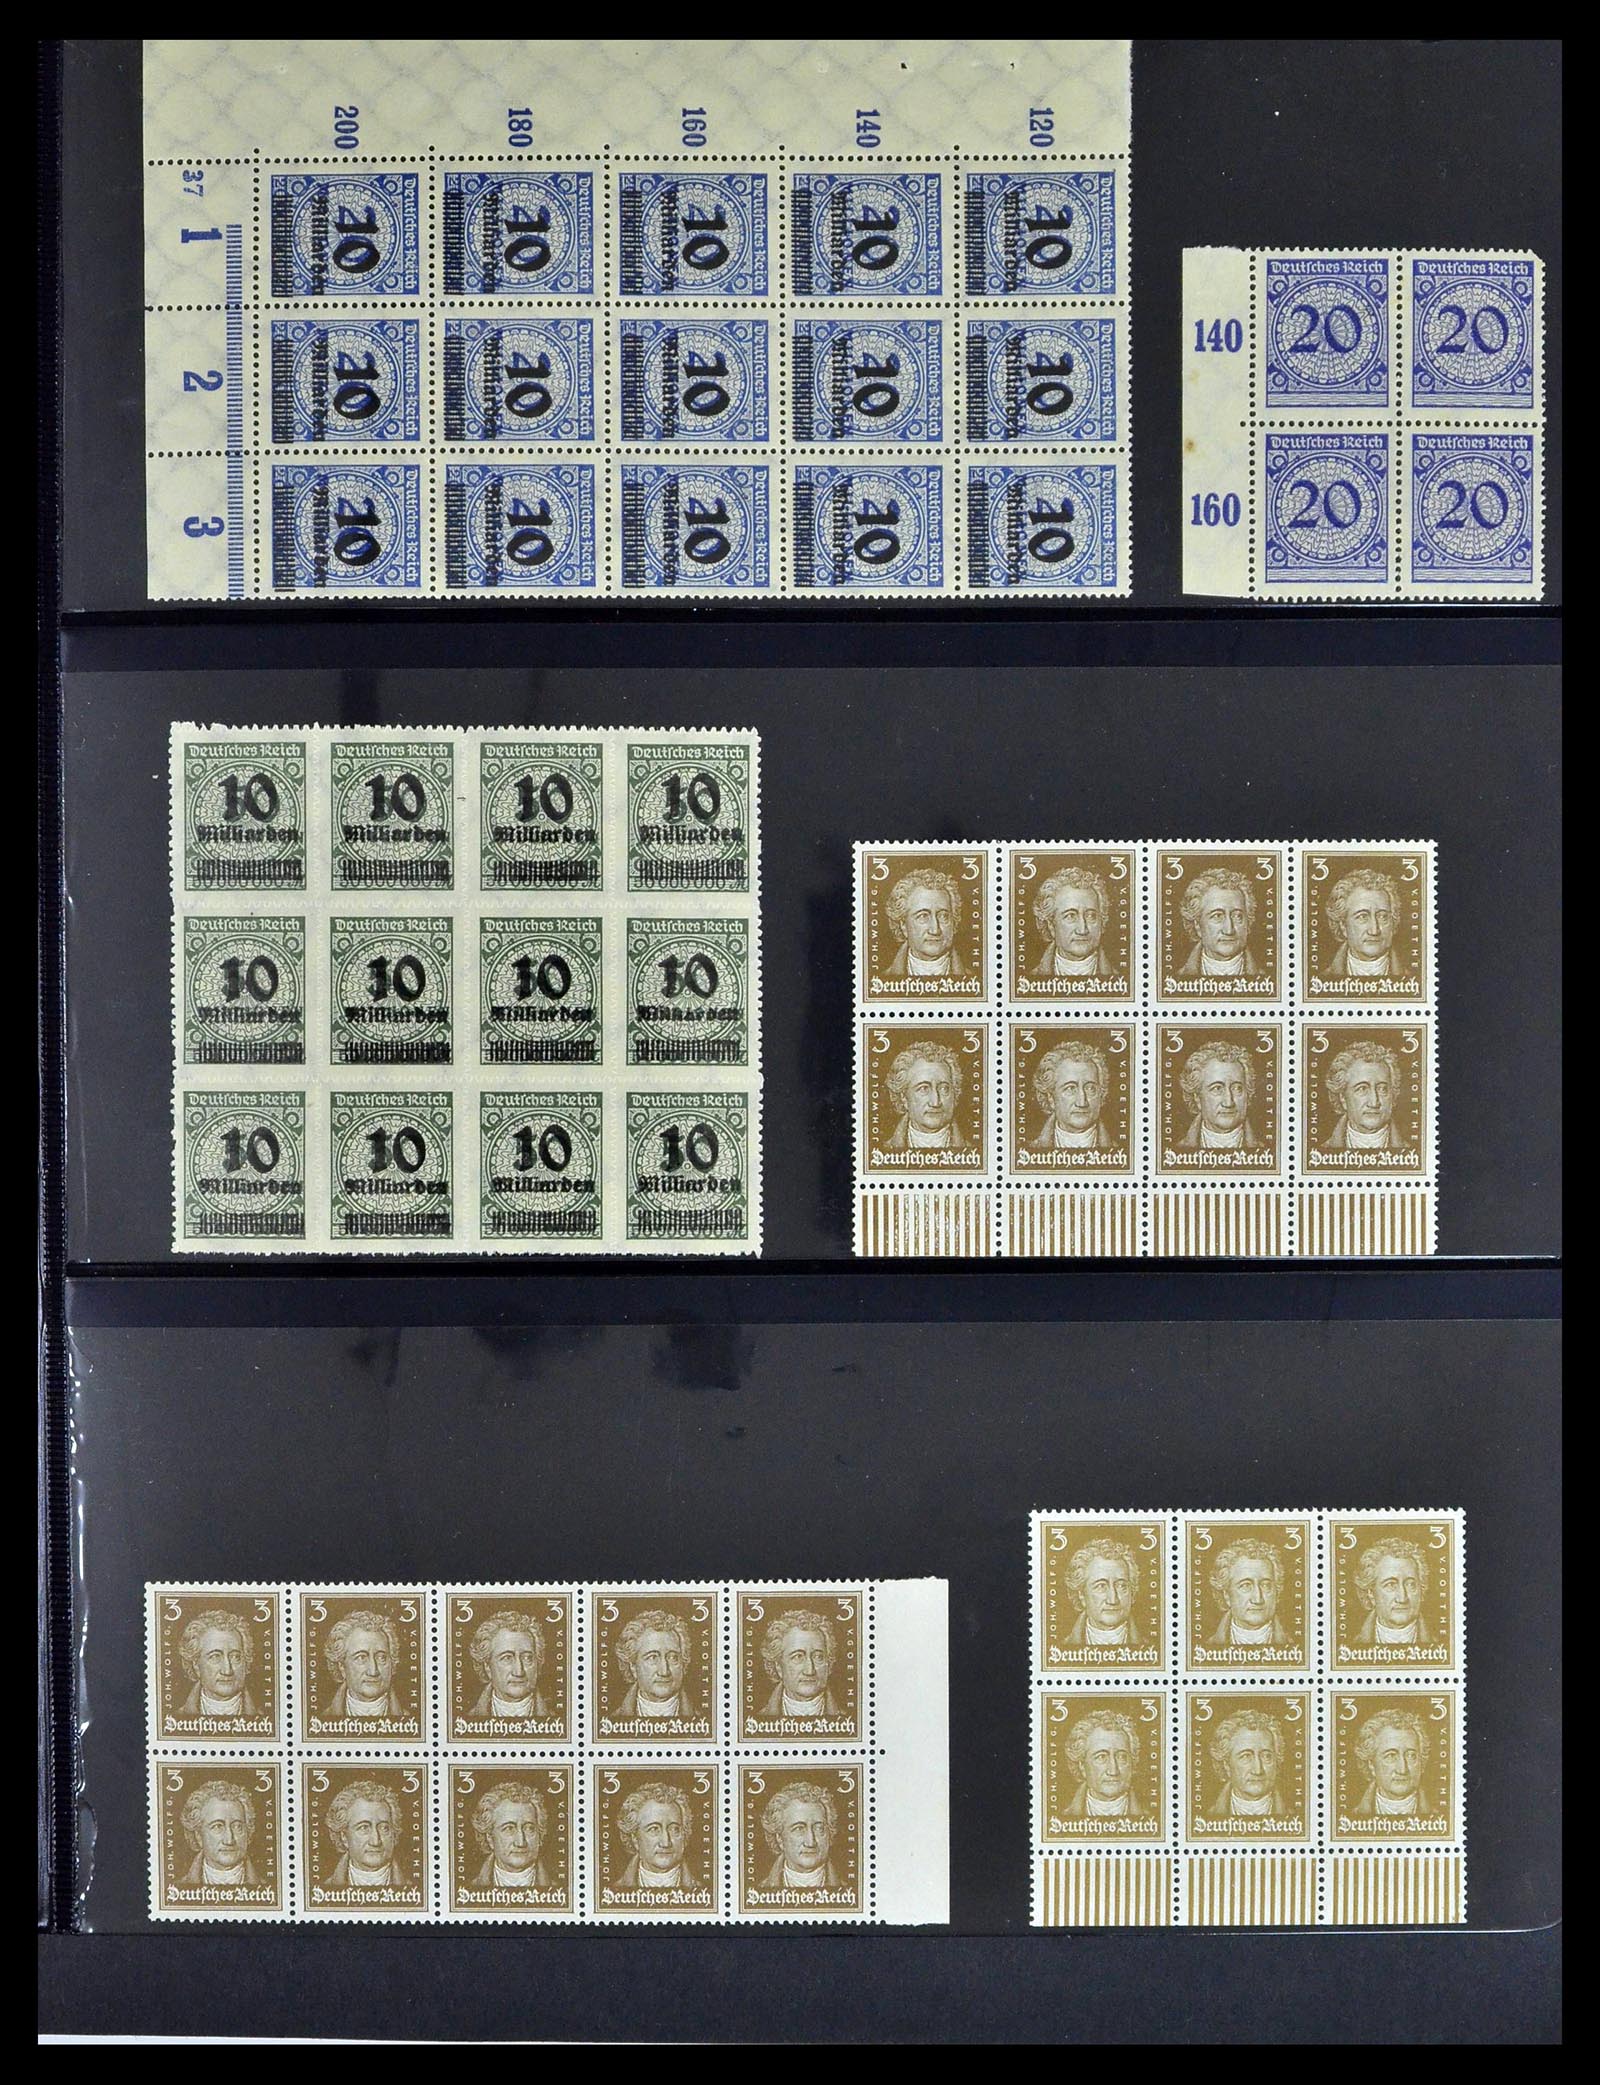 39255 0013 - Stamp collection 39255 German Reich MNH blocks of 4.